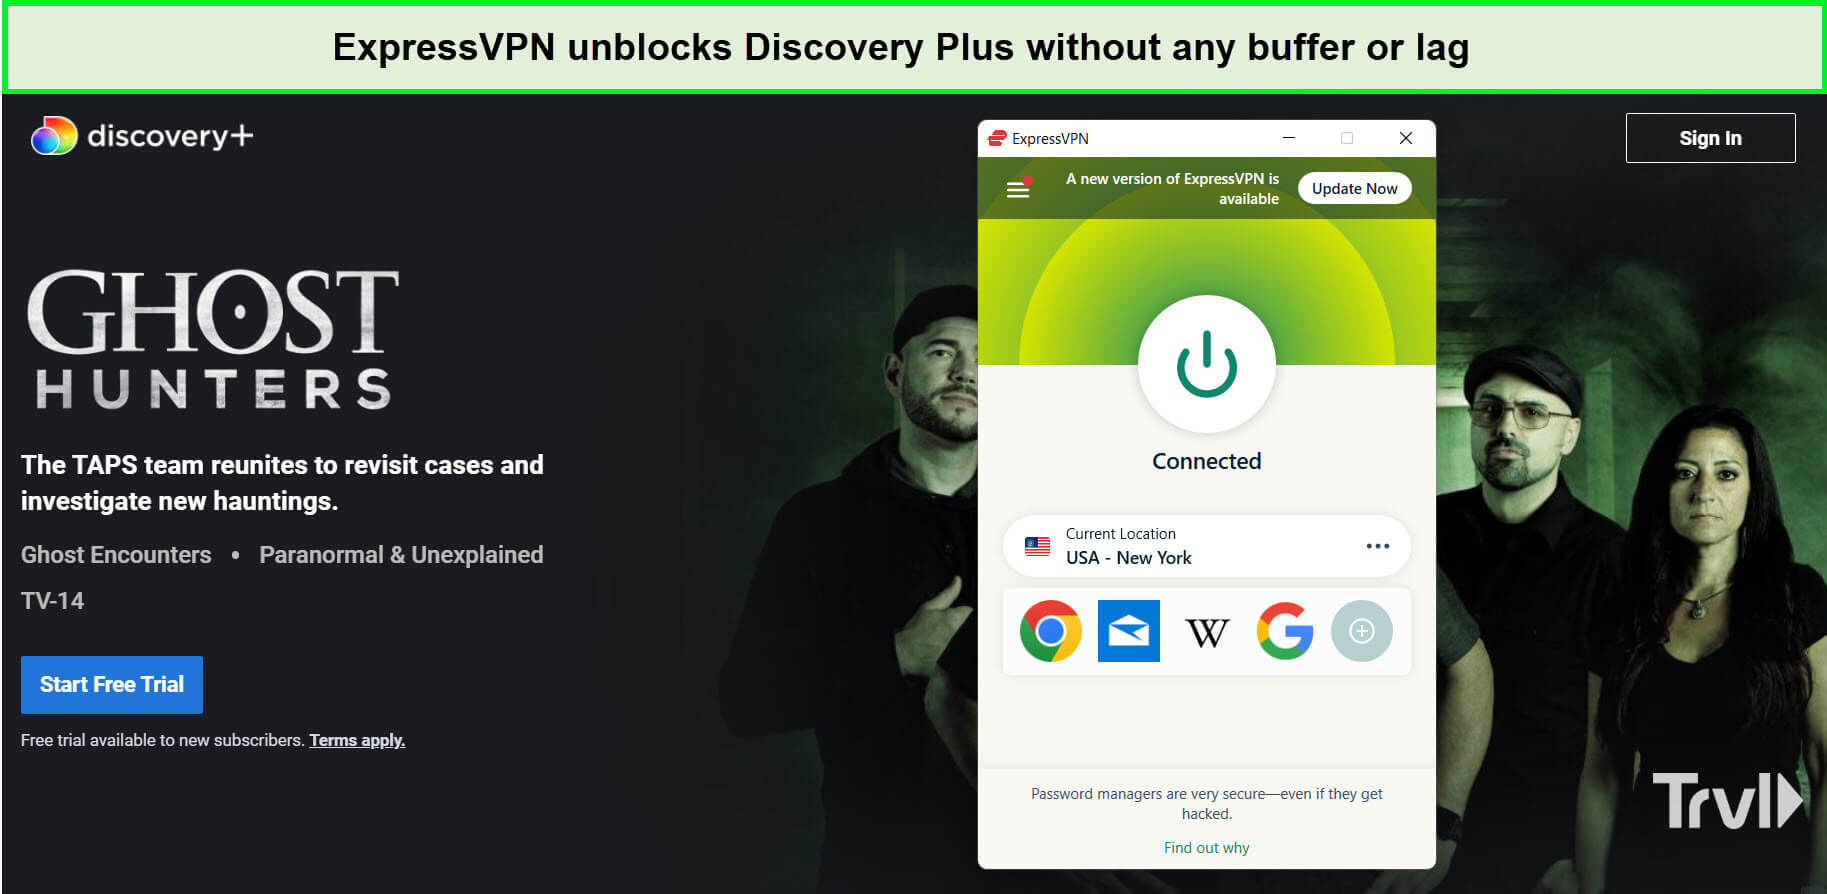 expressvpn-unblocks-ghost-hunters-on-discovery-plus-in-Germany